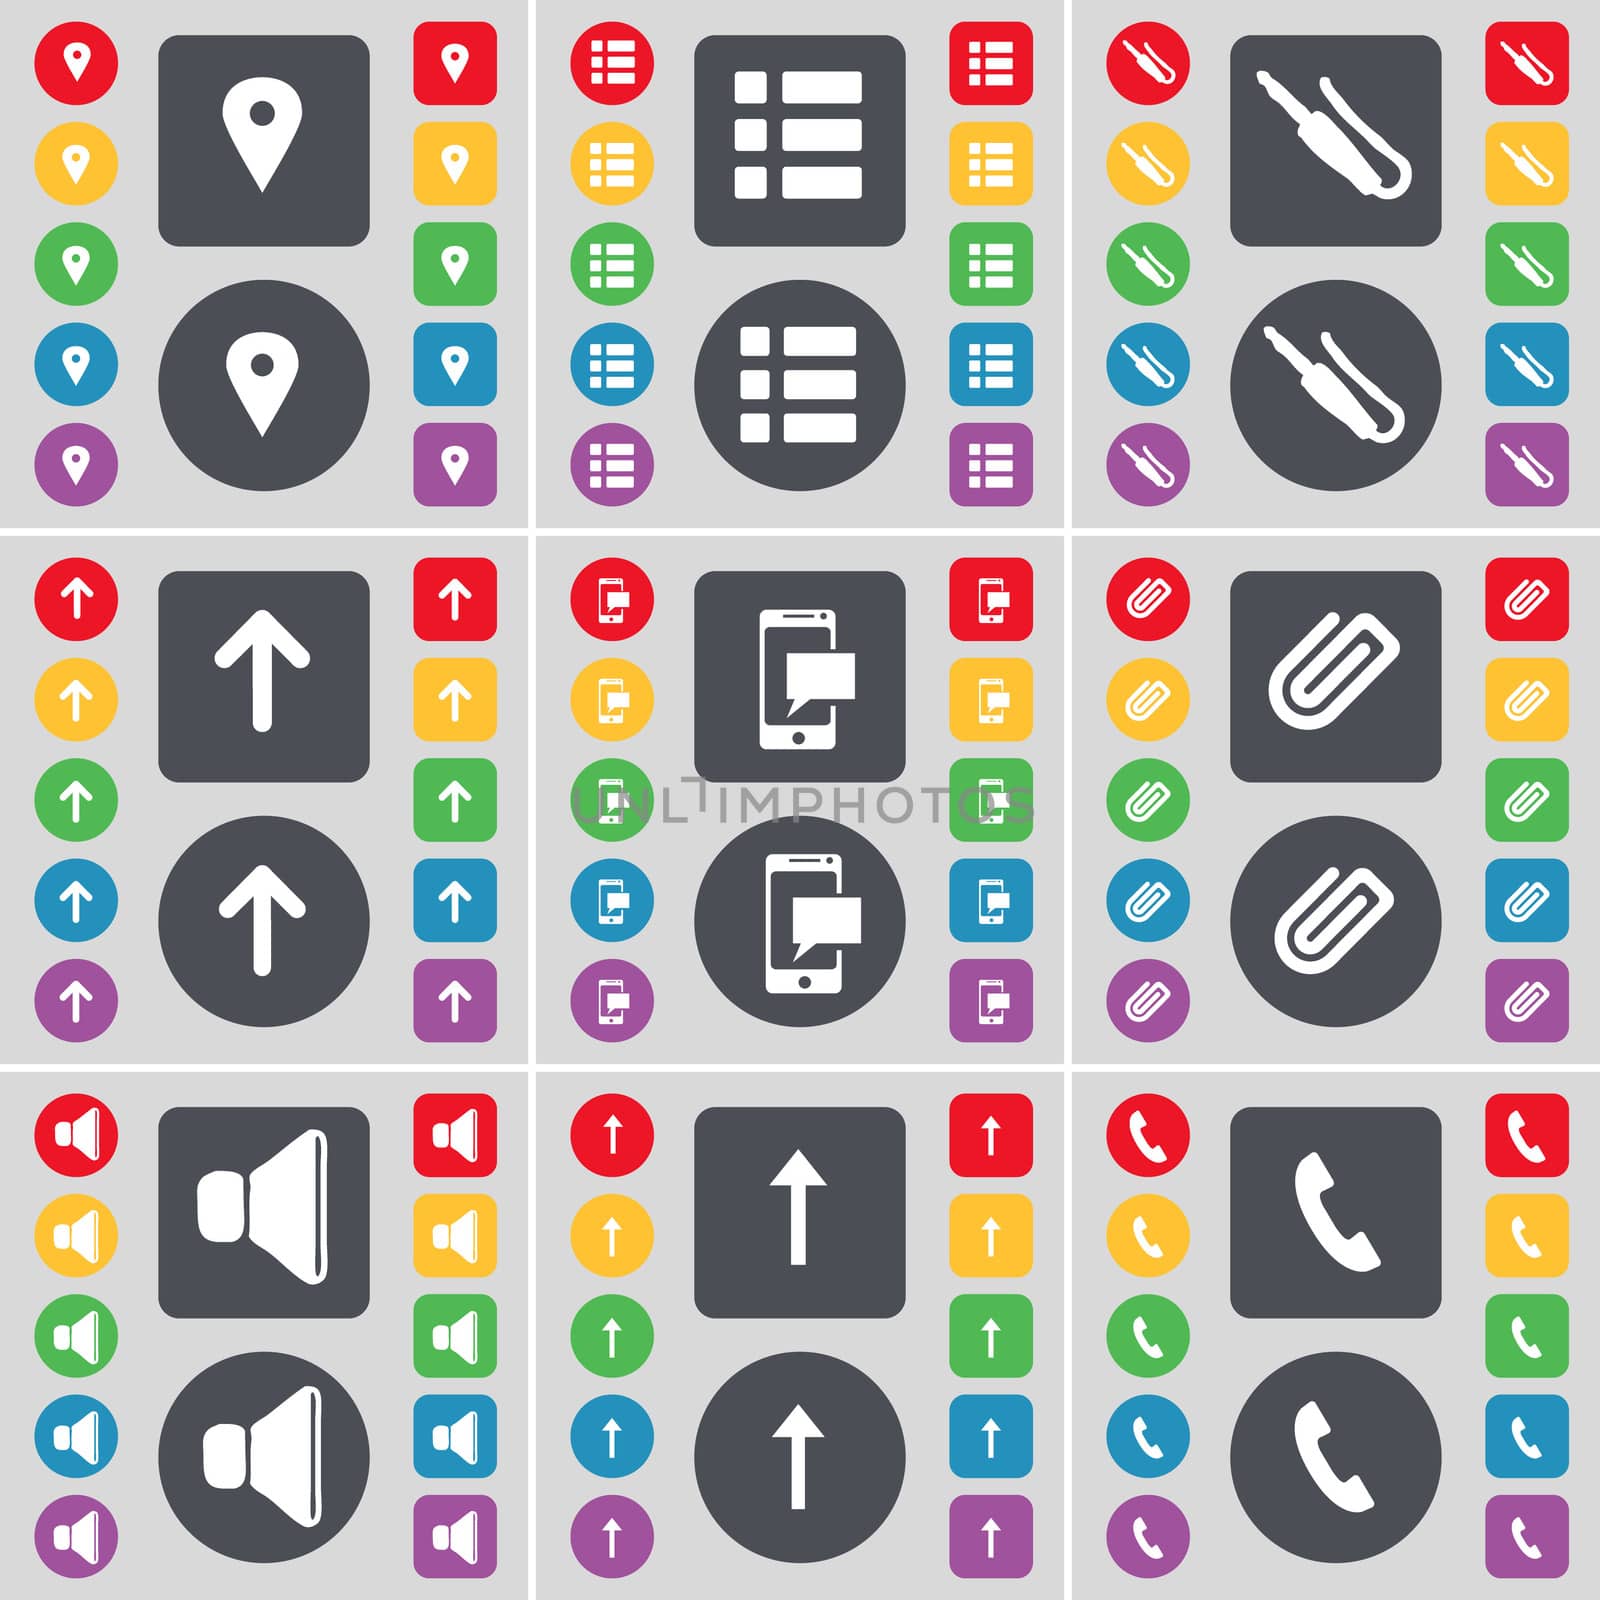 Checkpoint, List, Microphone connector, Arrow up, SMS, Clip, Sound, Arrow up, Receiver icon symbol. A large set of flat, colored buttons for your design. illustration